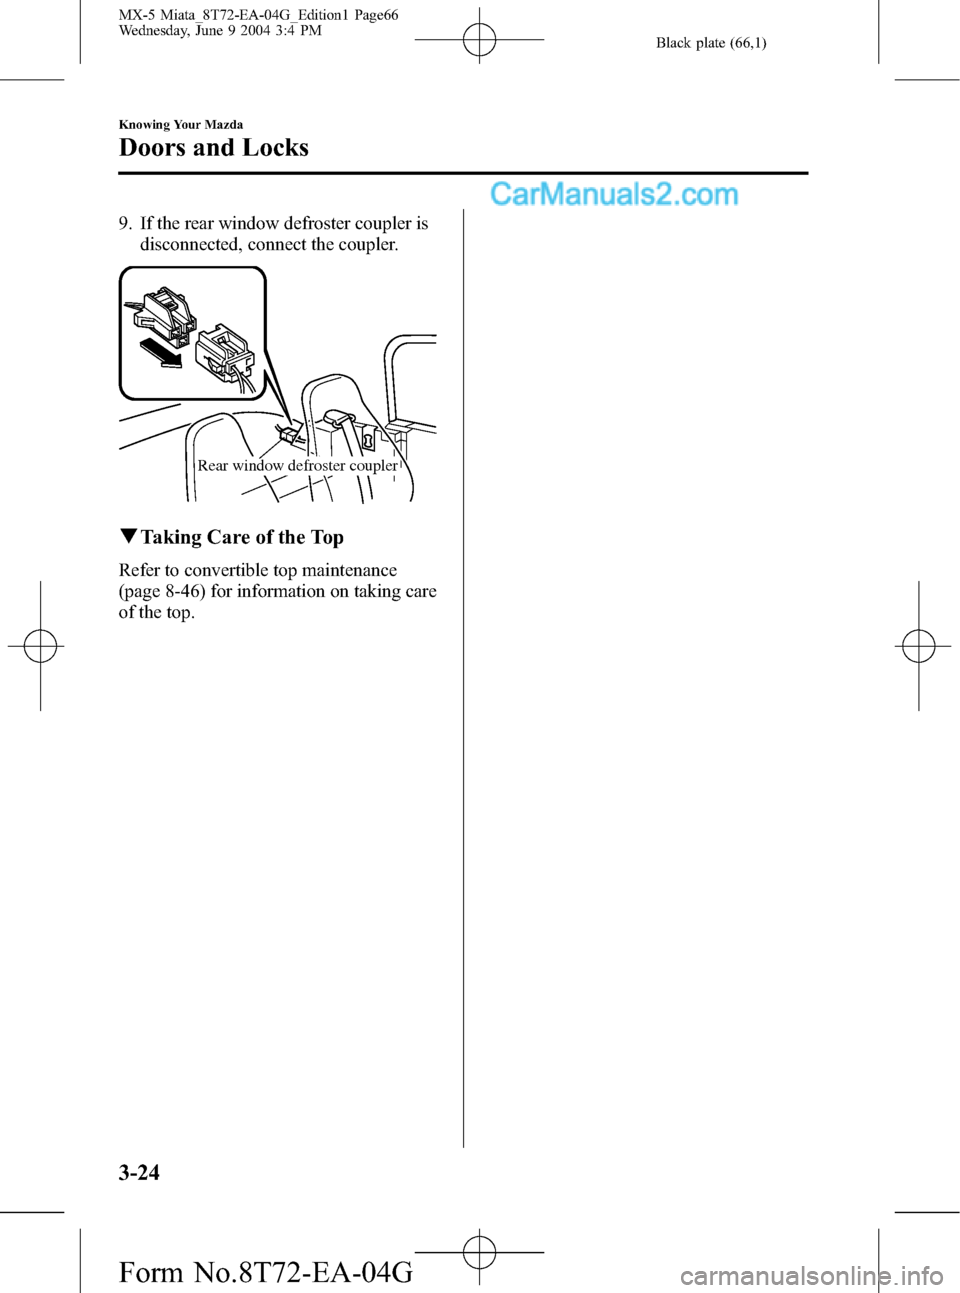 MAZDA MODEL MX-5 2005  Owners Manual (in English) Black plate (66,1)
9. If the rear window defroster coupler is
disconnected, connect the coupler.
Rear window defroster coupler
qTaking Care of the Top
Refer to convertible top maintenance
(page 8-46) 